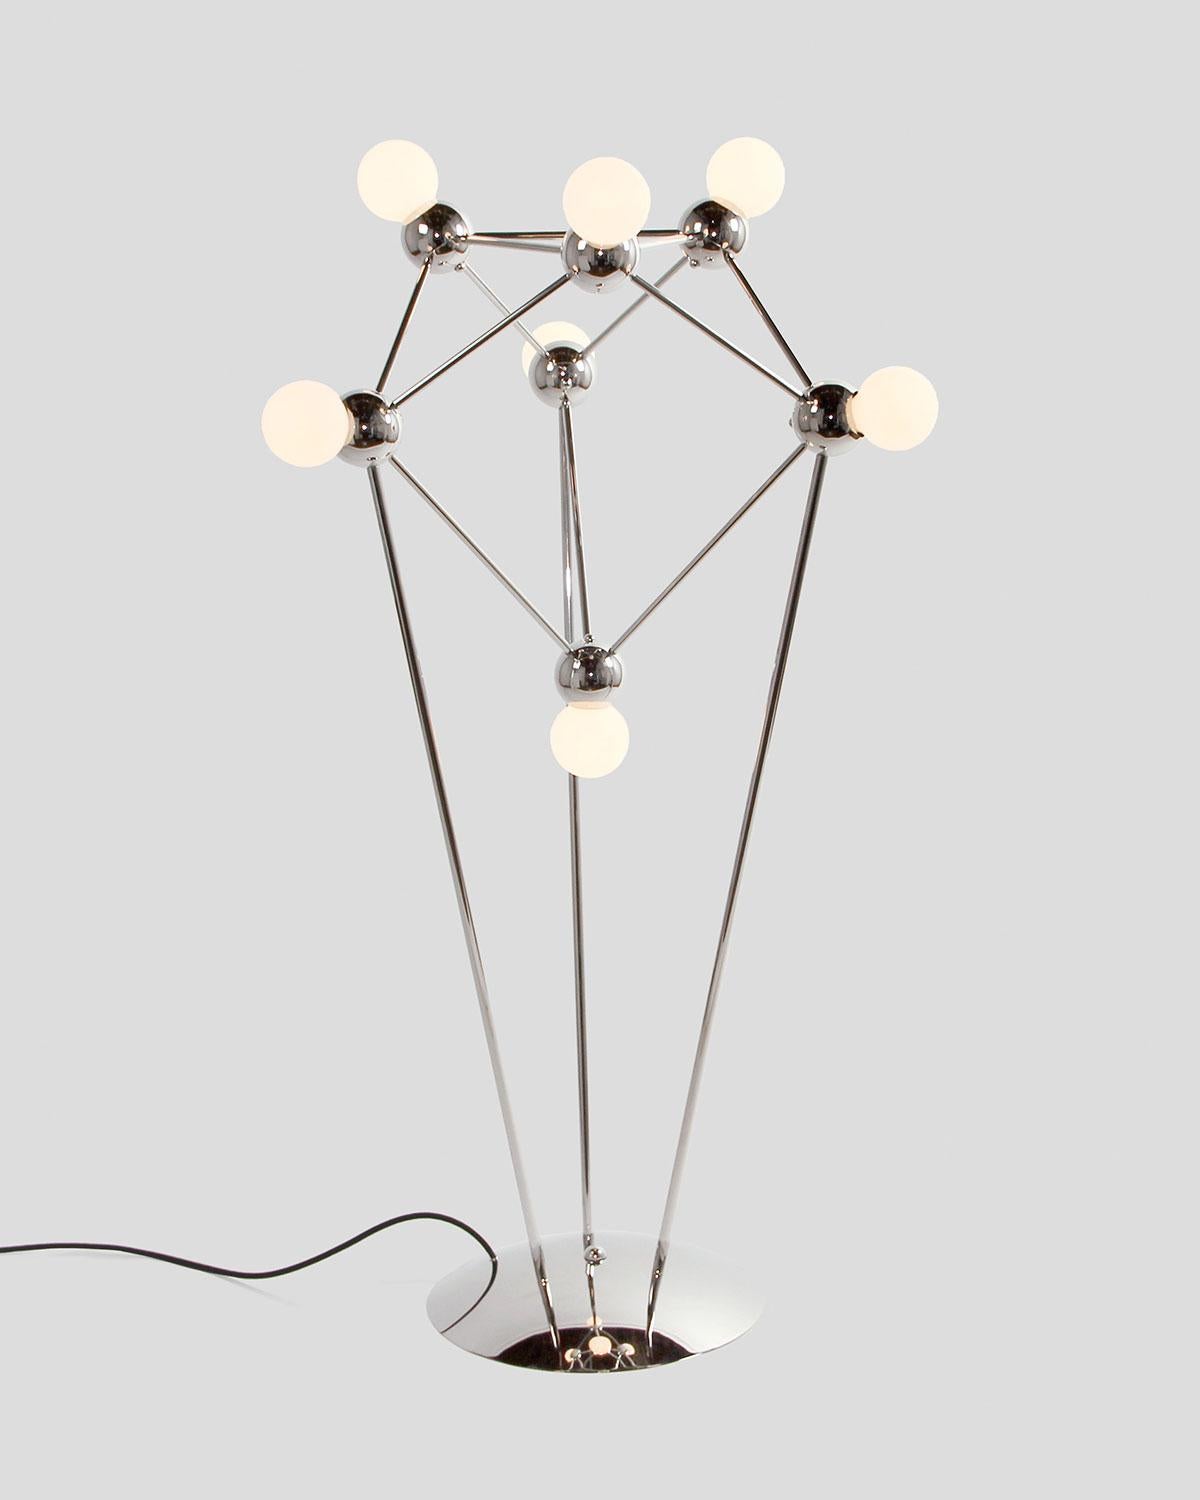 Inspired by 1960s Italian lighting, Lina is an all-brass lighting system designed to create airy geometric fixtures with minimal fasteners. Each shape uses a unique set of spherical hubs, while sizes are determined by round rods used interchangeably